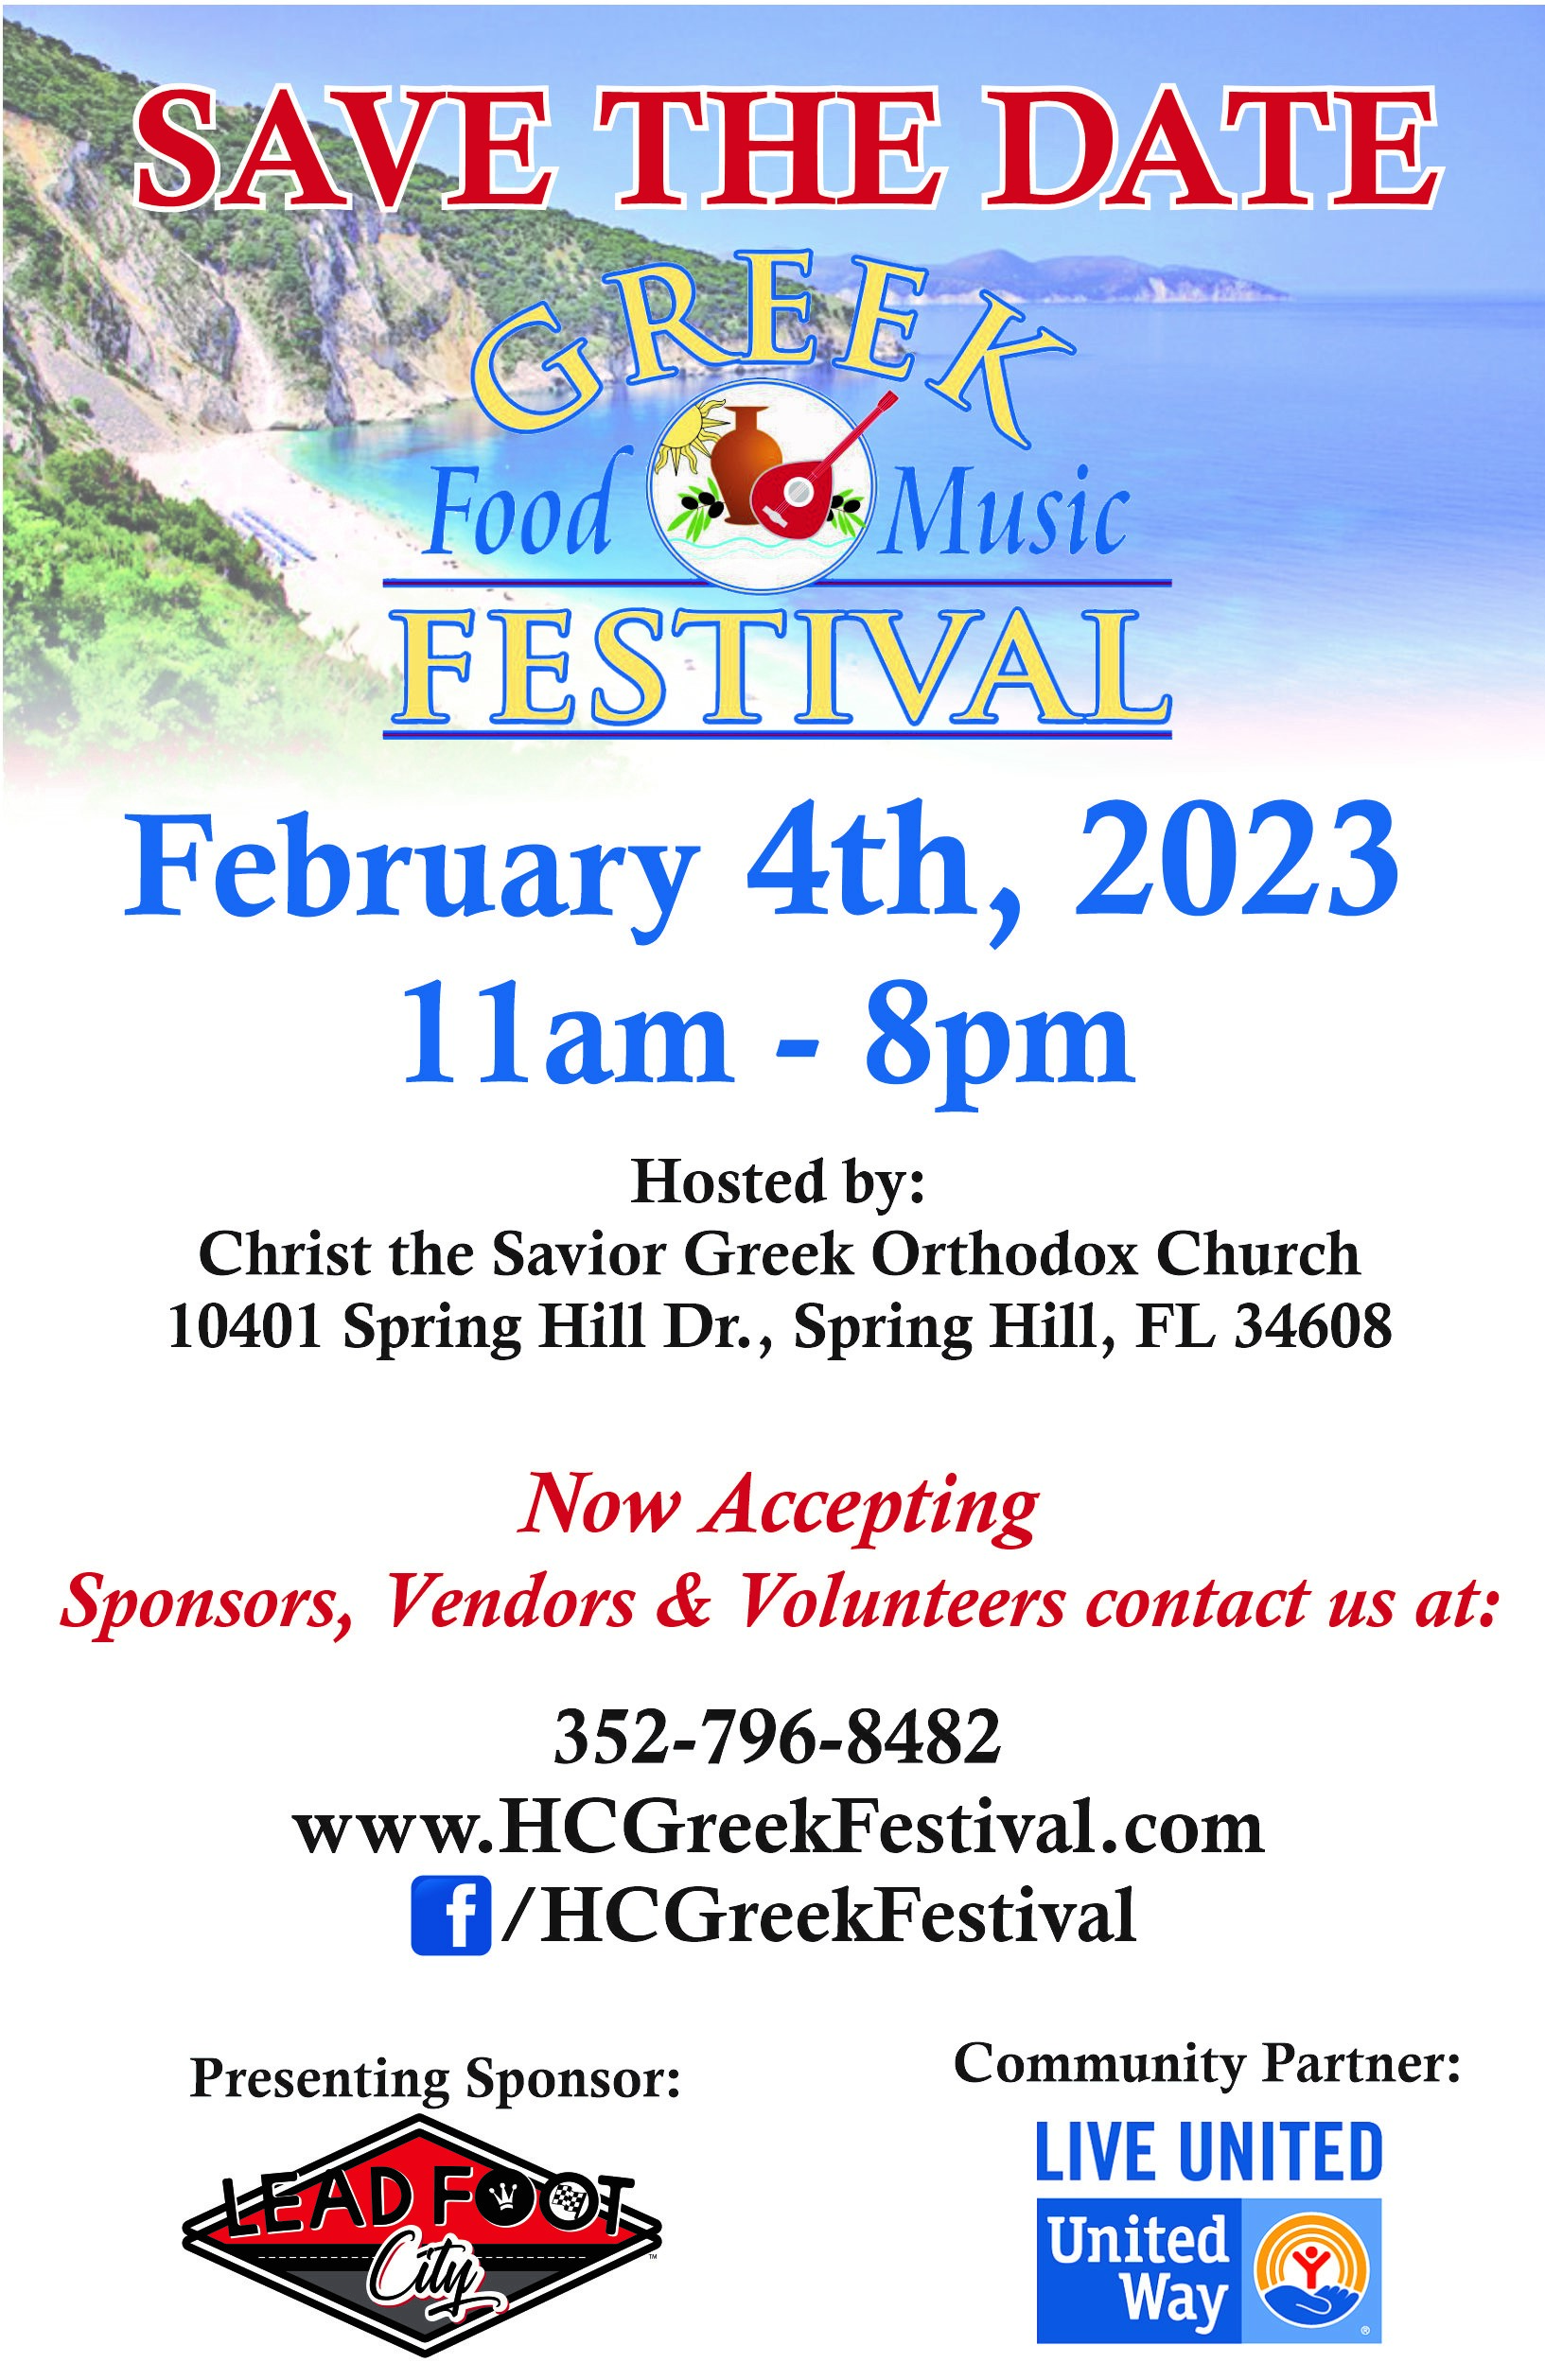 2023 Greek Festival Save the Date 